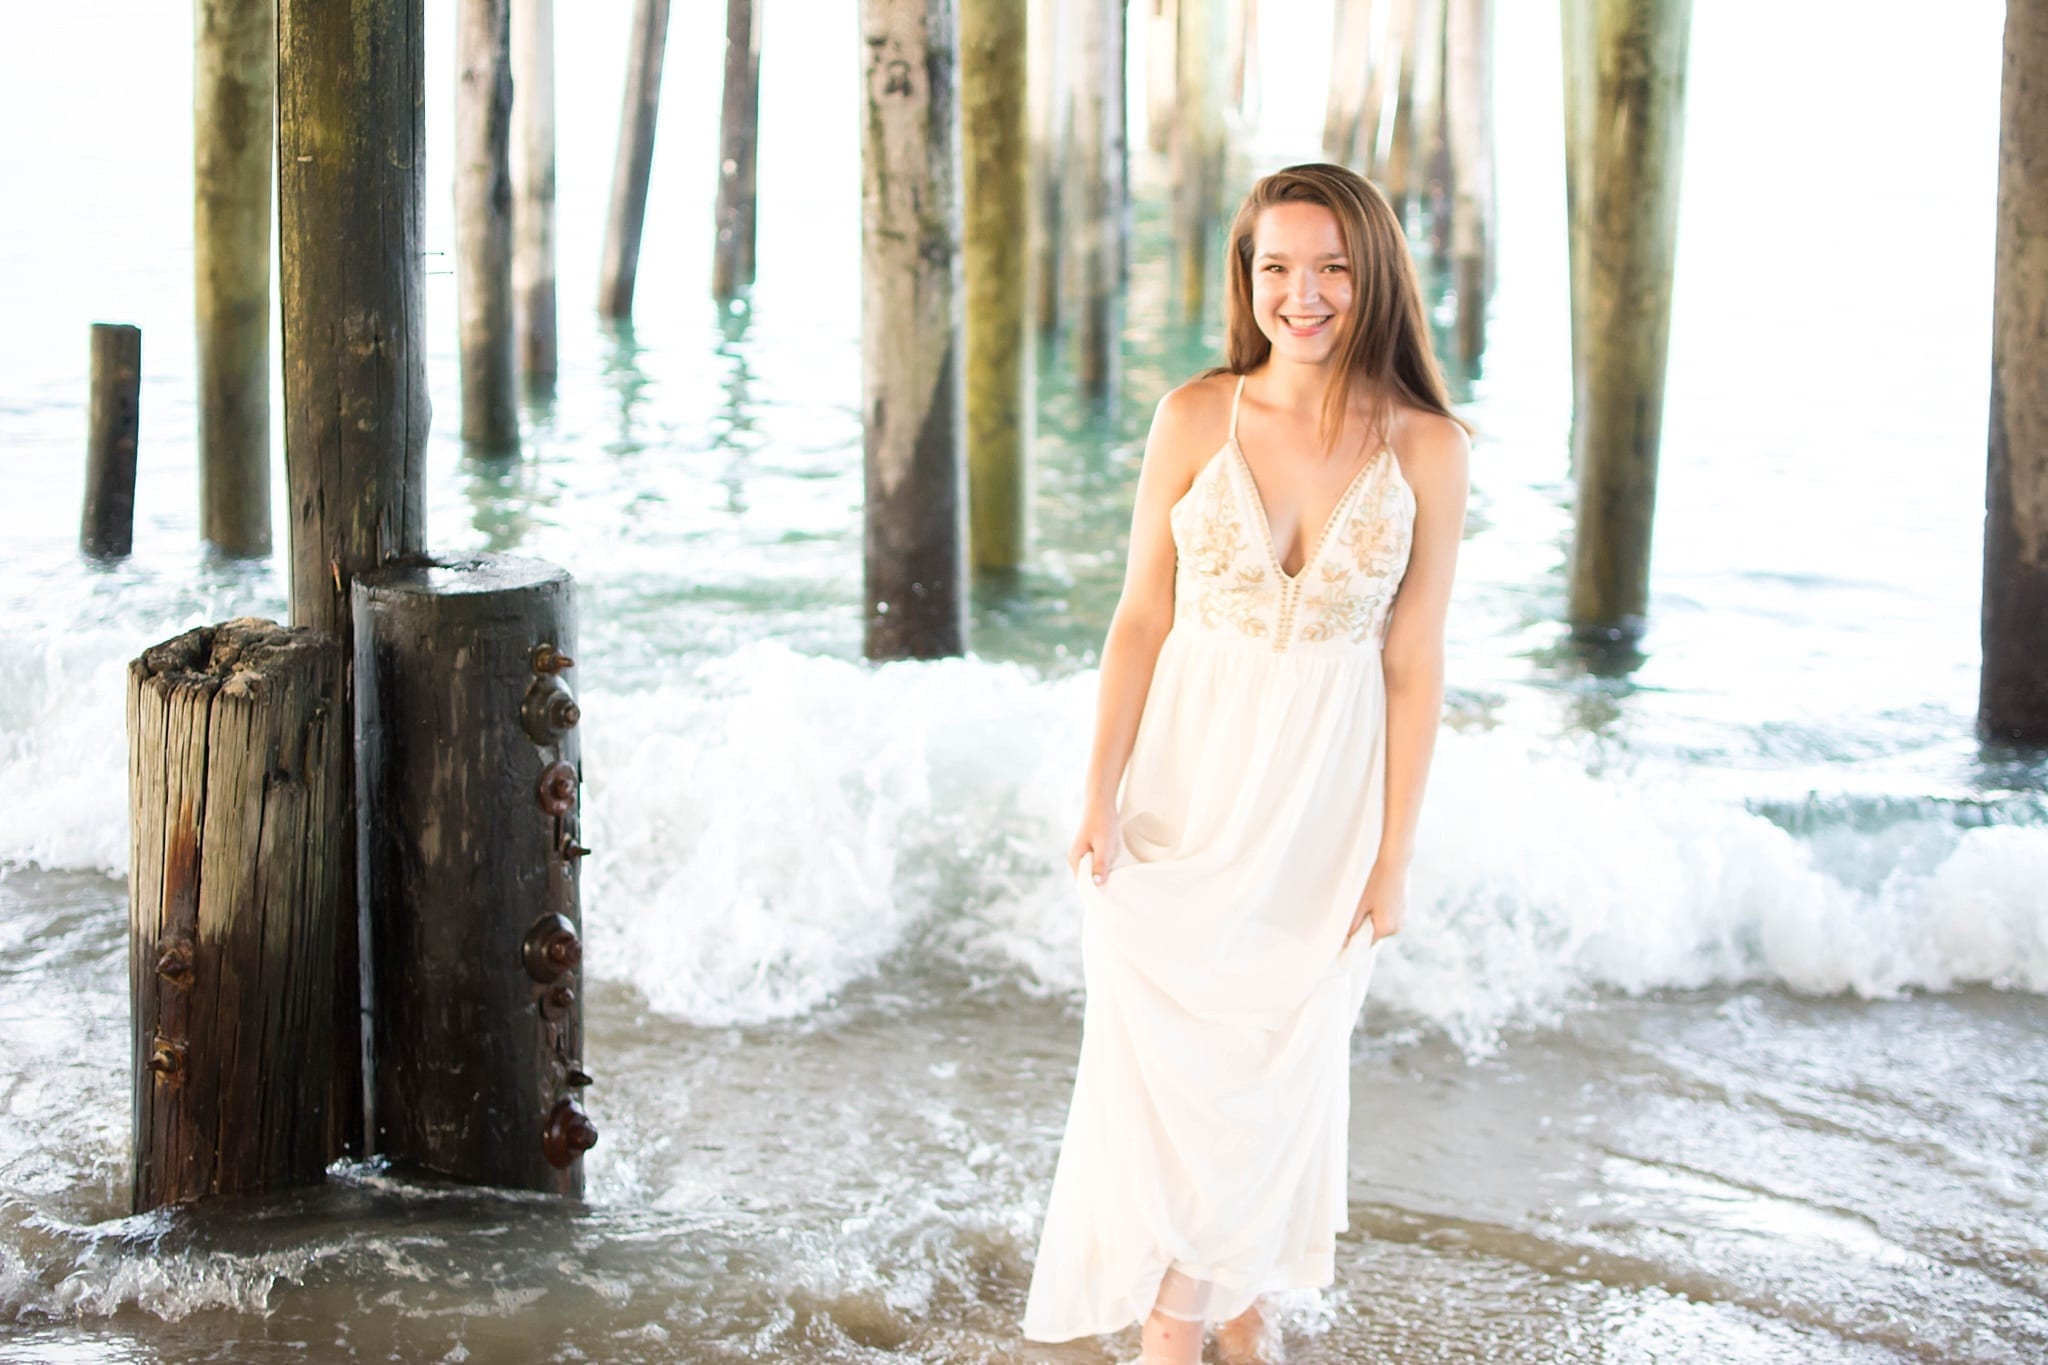 Senior portraits in white dress with K. Dowler Photography